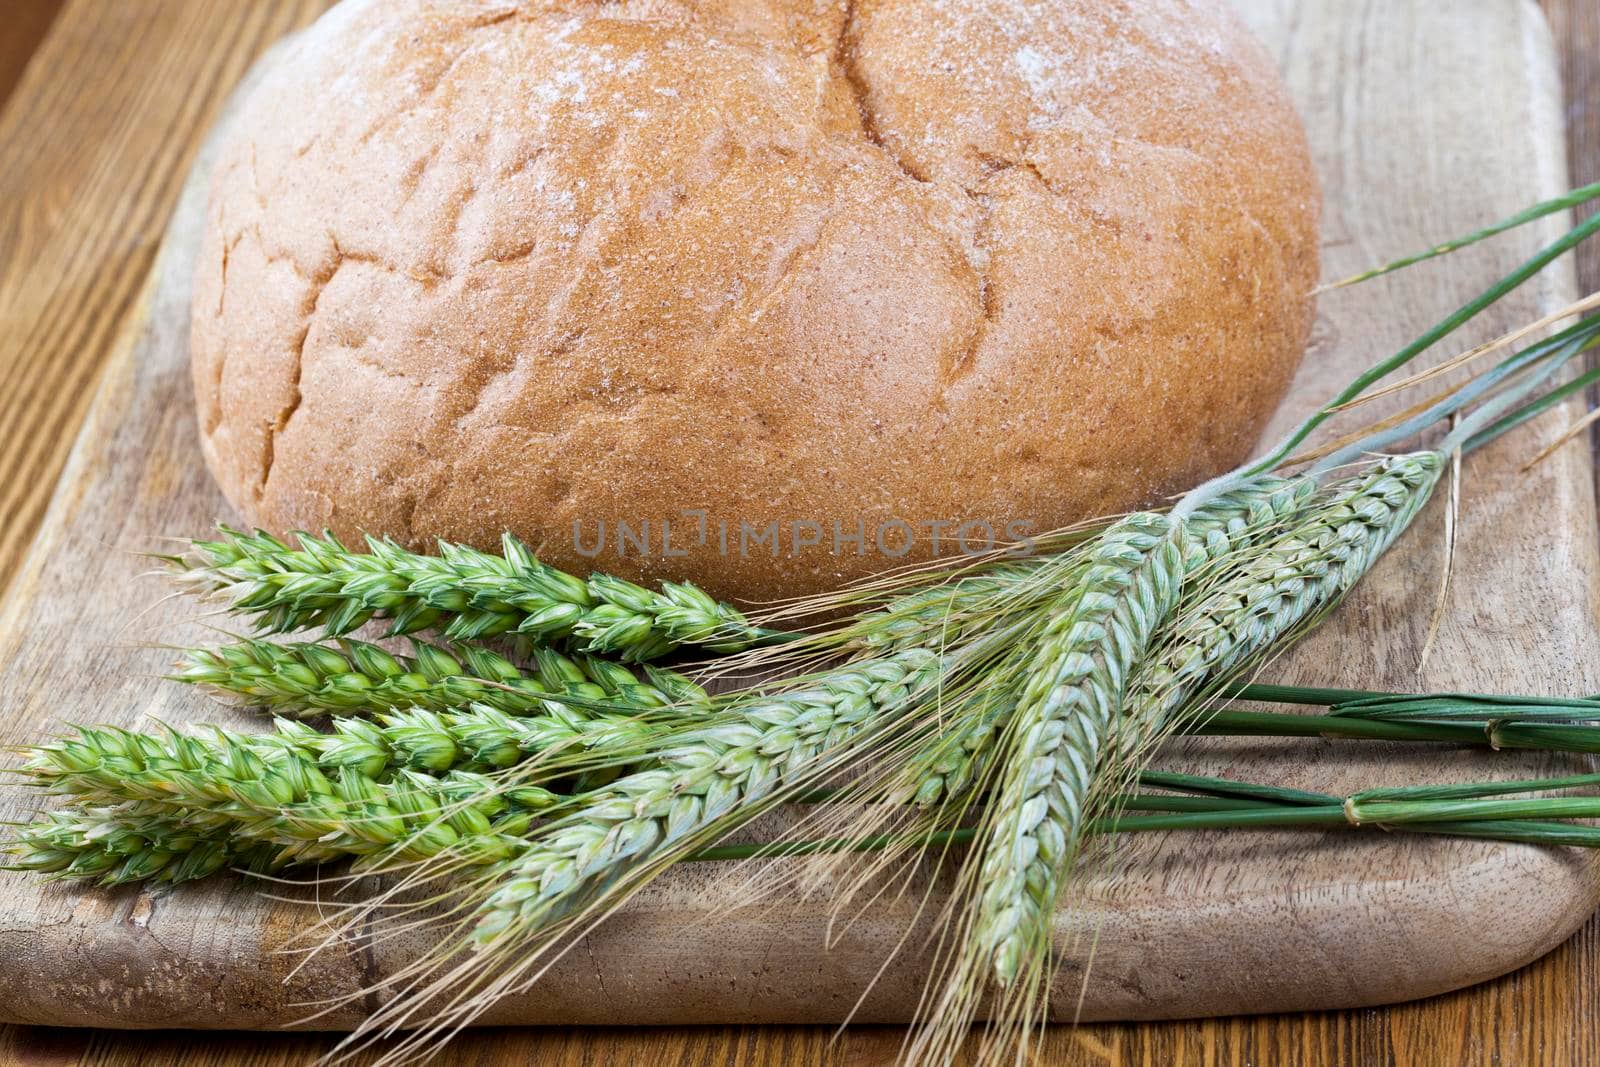 green ears of wheat and rye lying together with a freshly baked loaf of home-made bread. photo close up